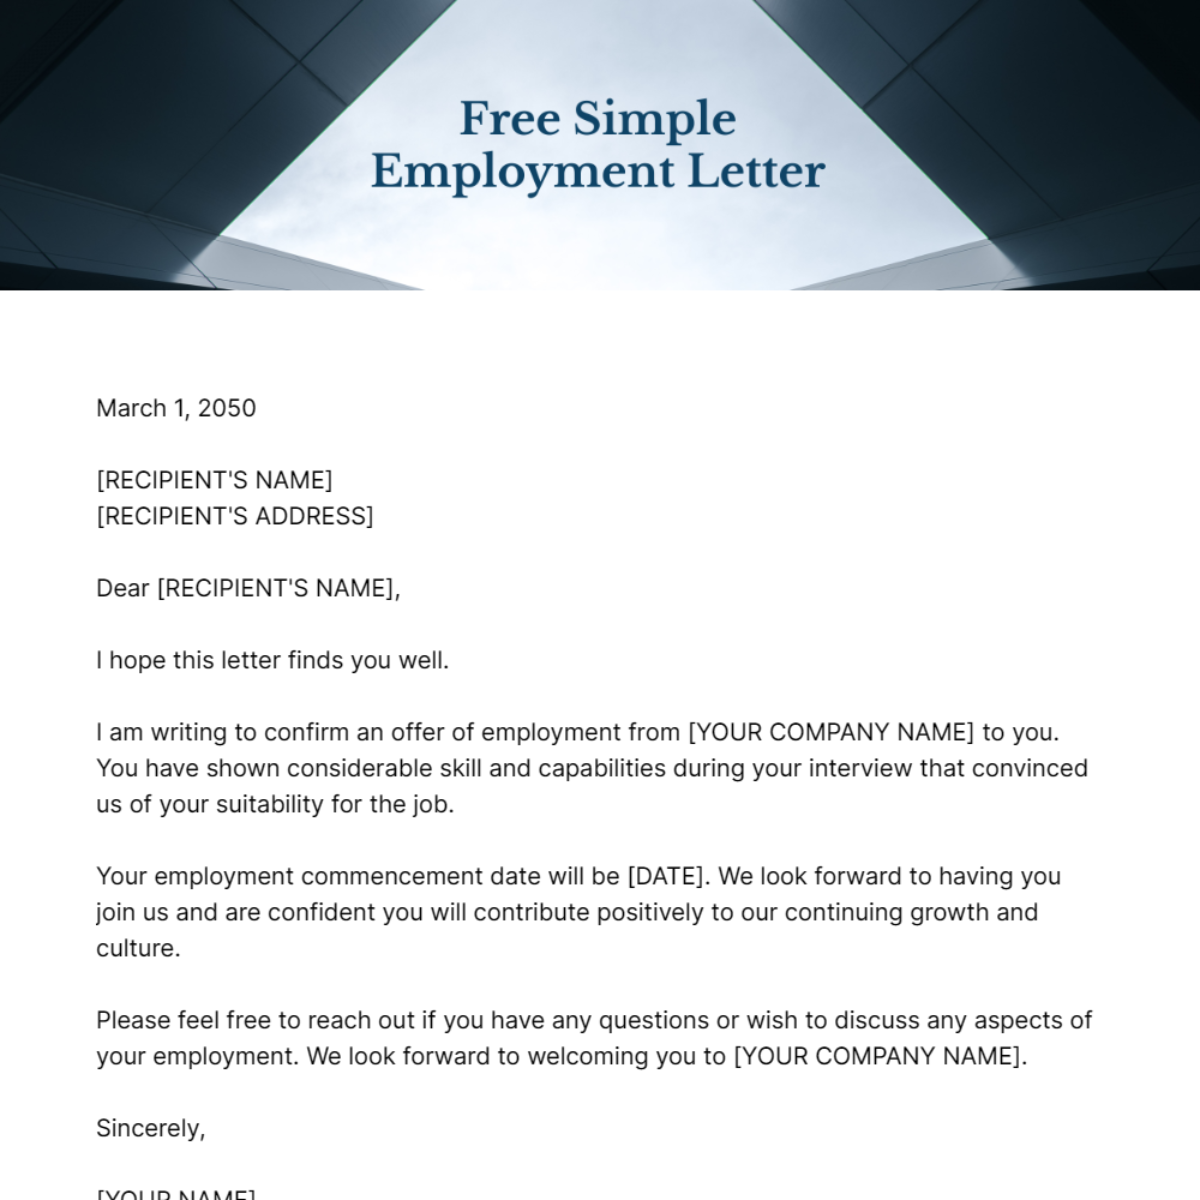 Simple Employment Letter Template